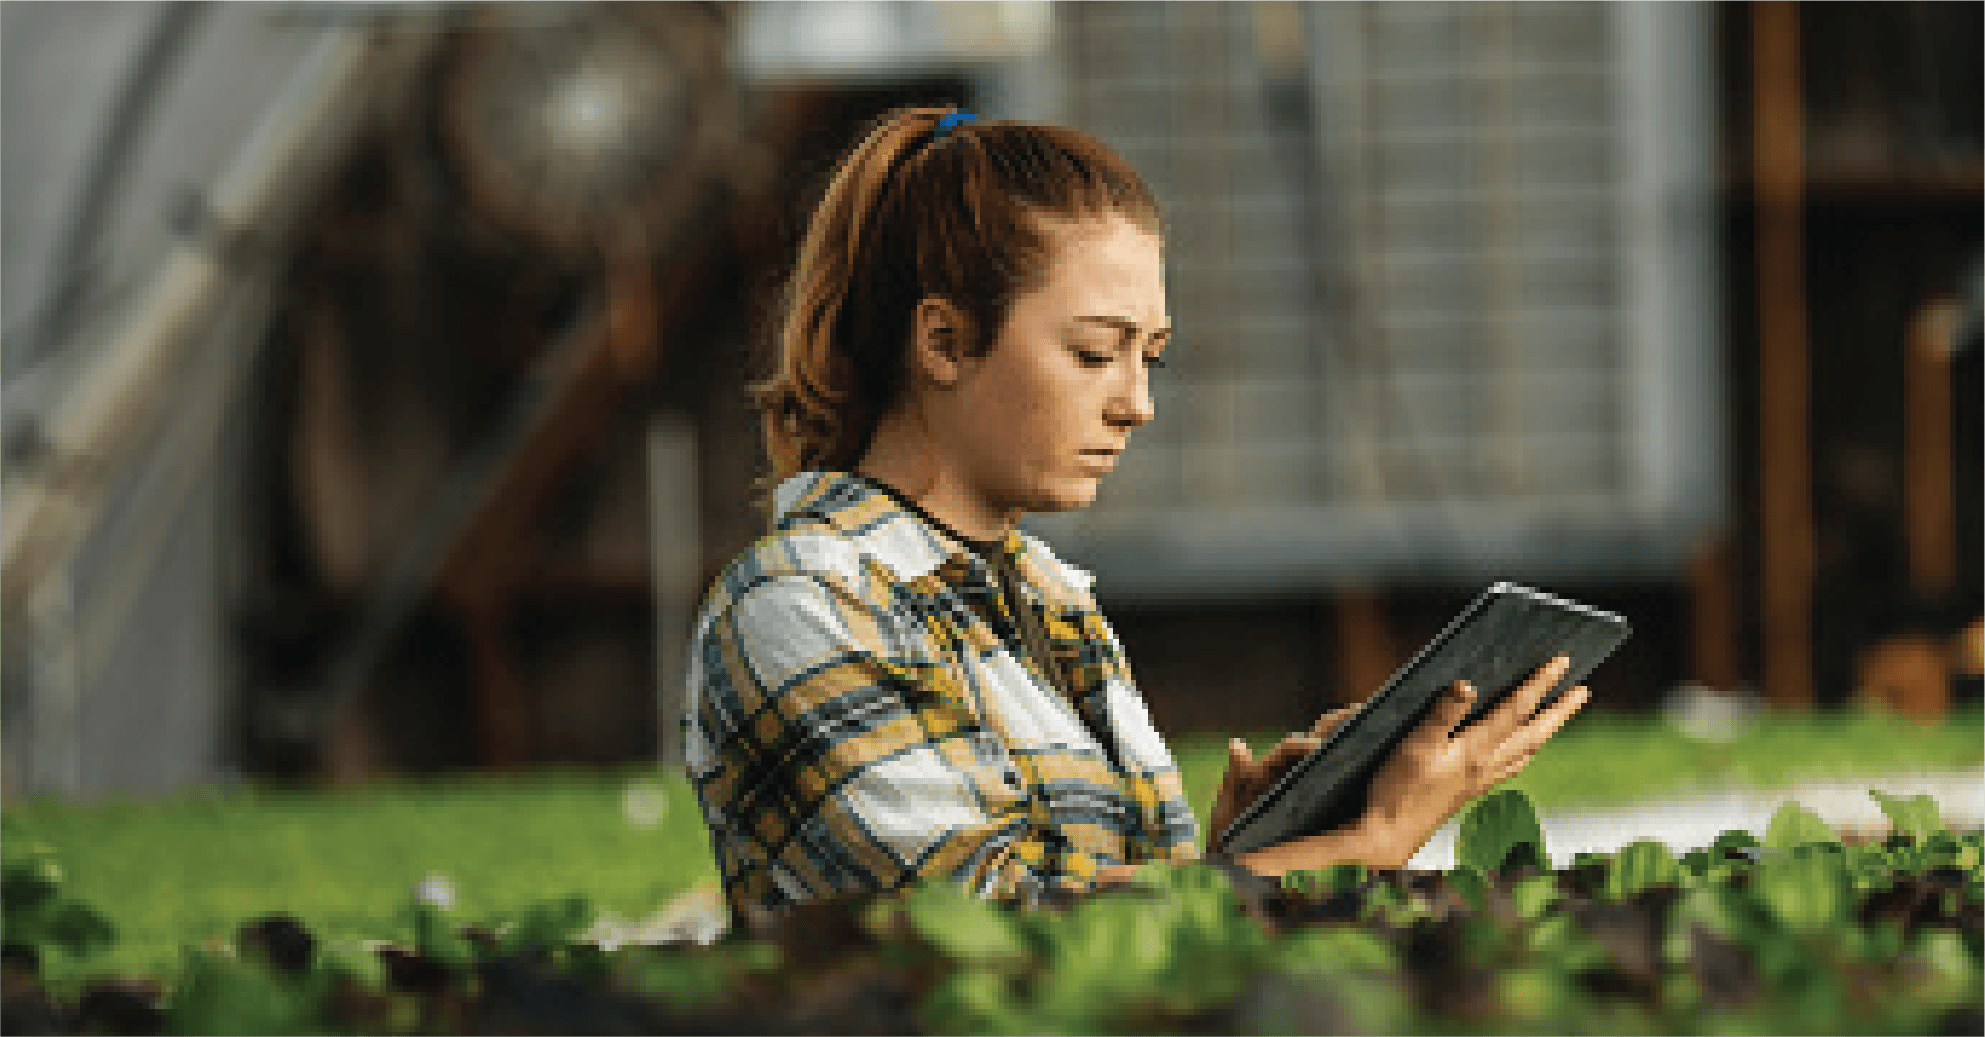 Lady looking confused at tablet while in a plant farm